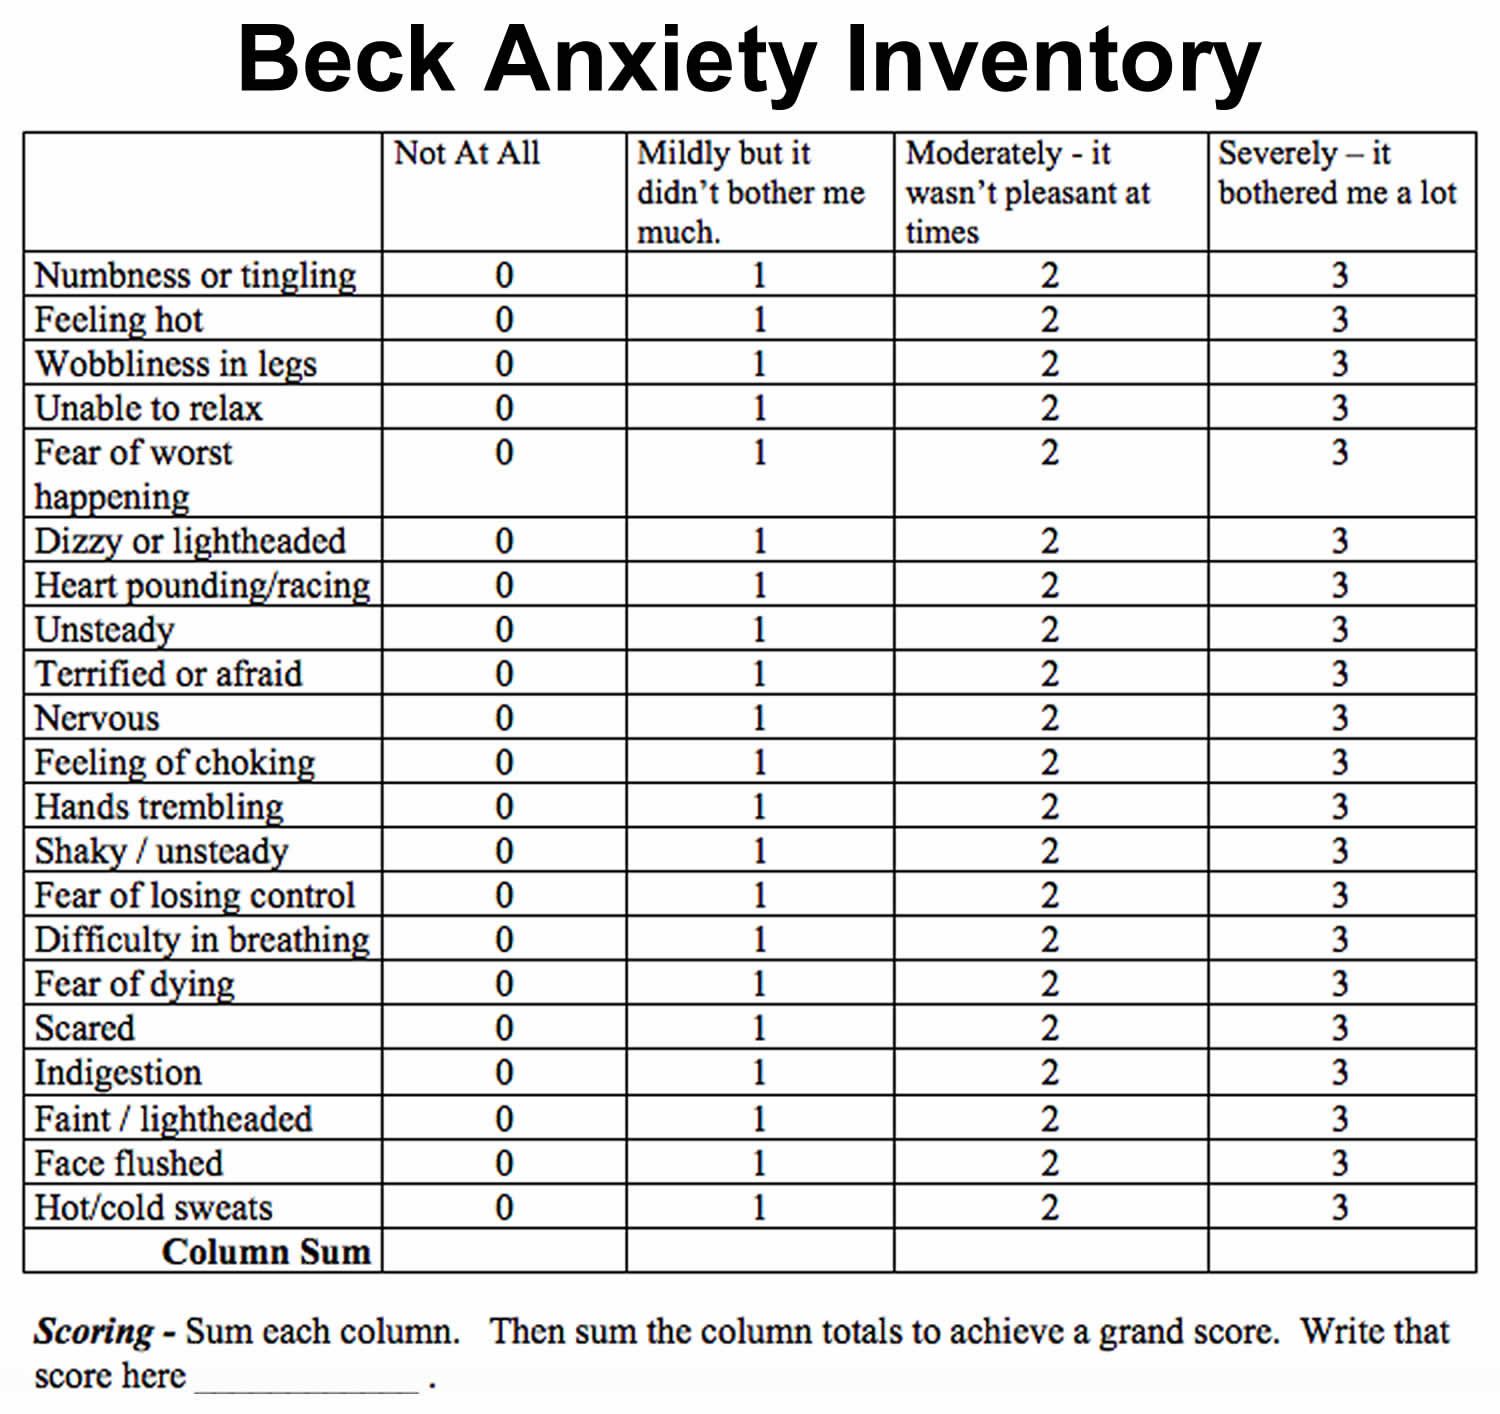 Test Anxiety Inventory Spielberger Pdf Download